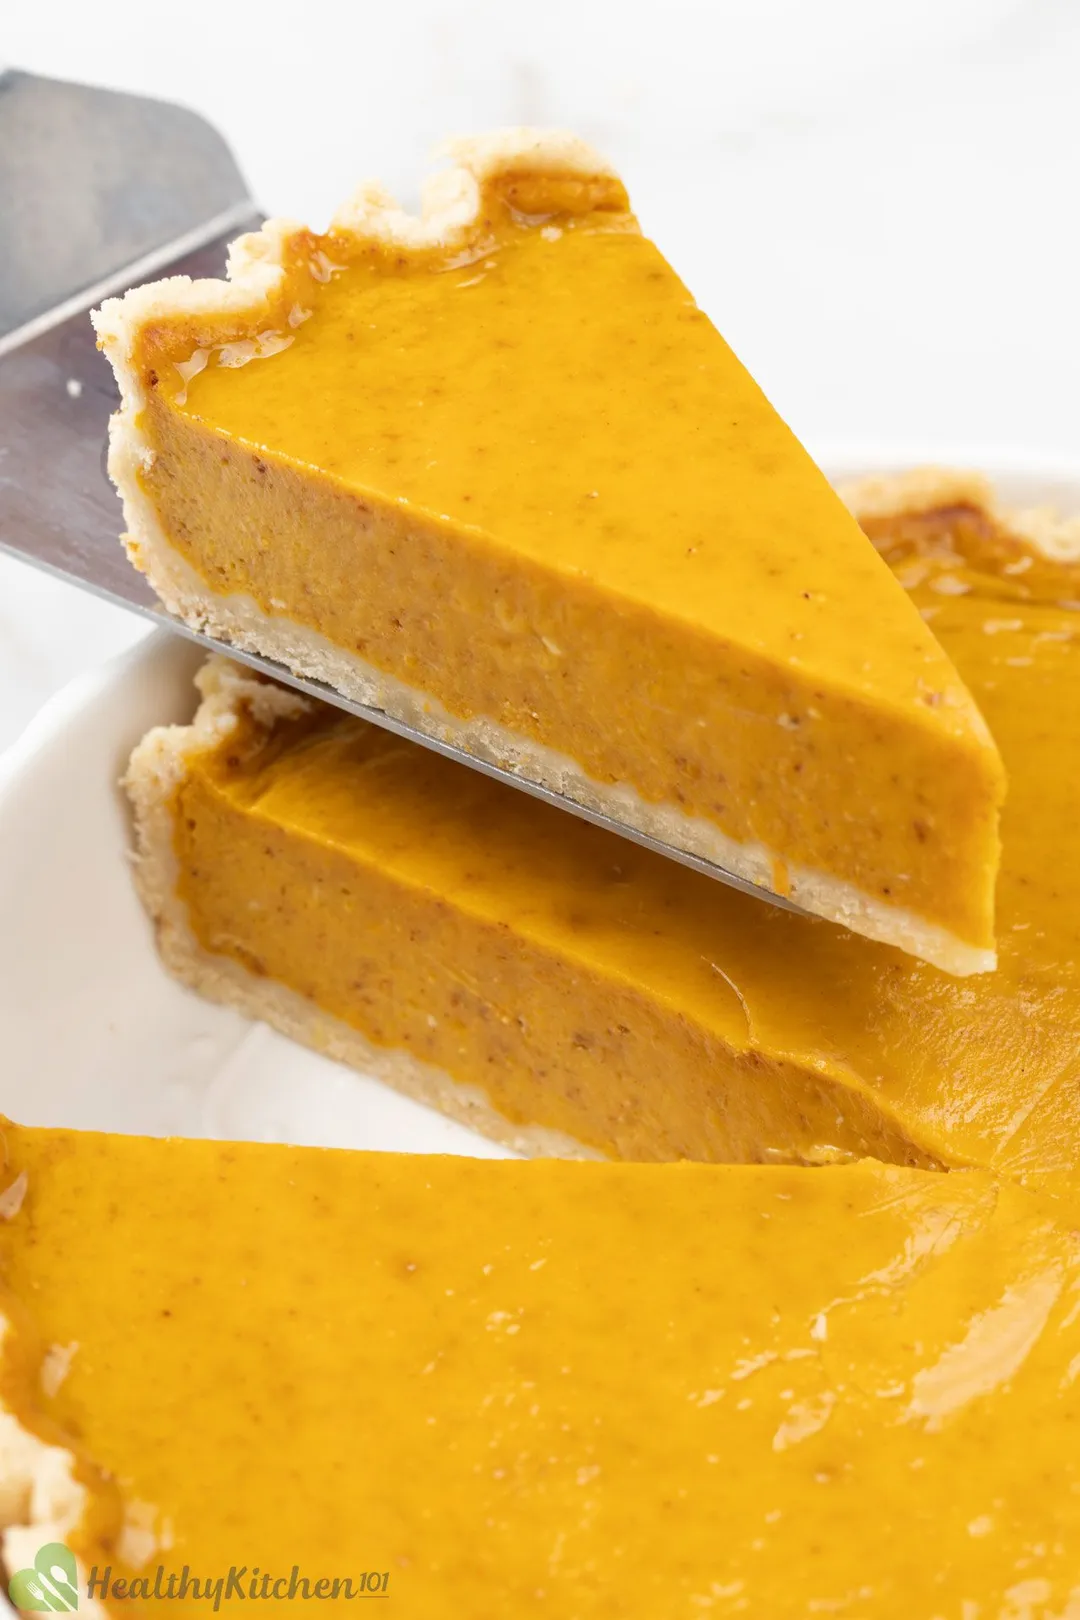 A piece of pumpkin pie being lifted from the whole pie.